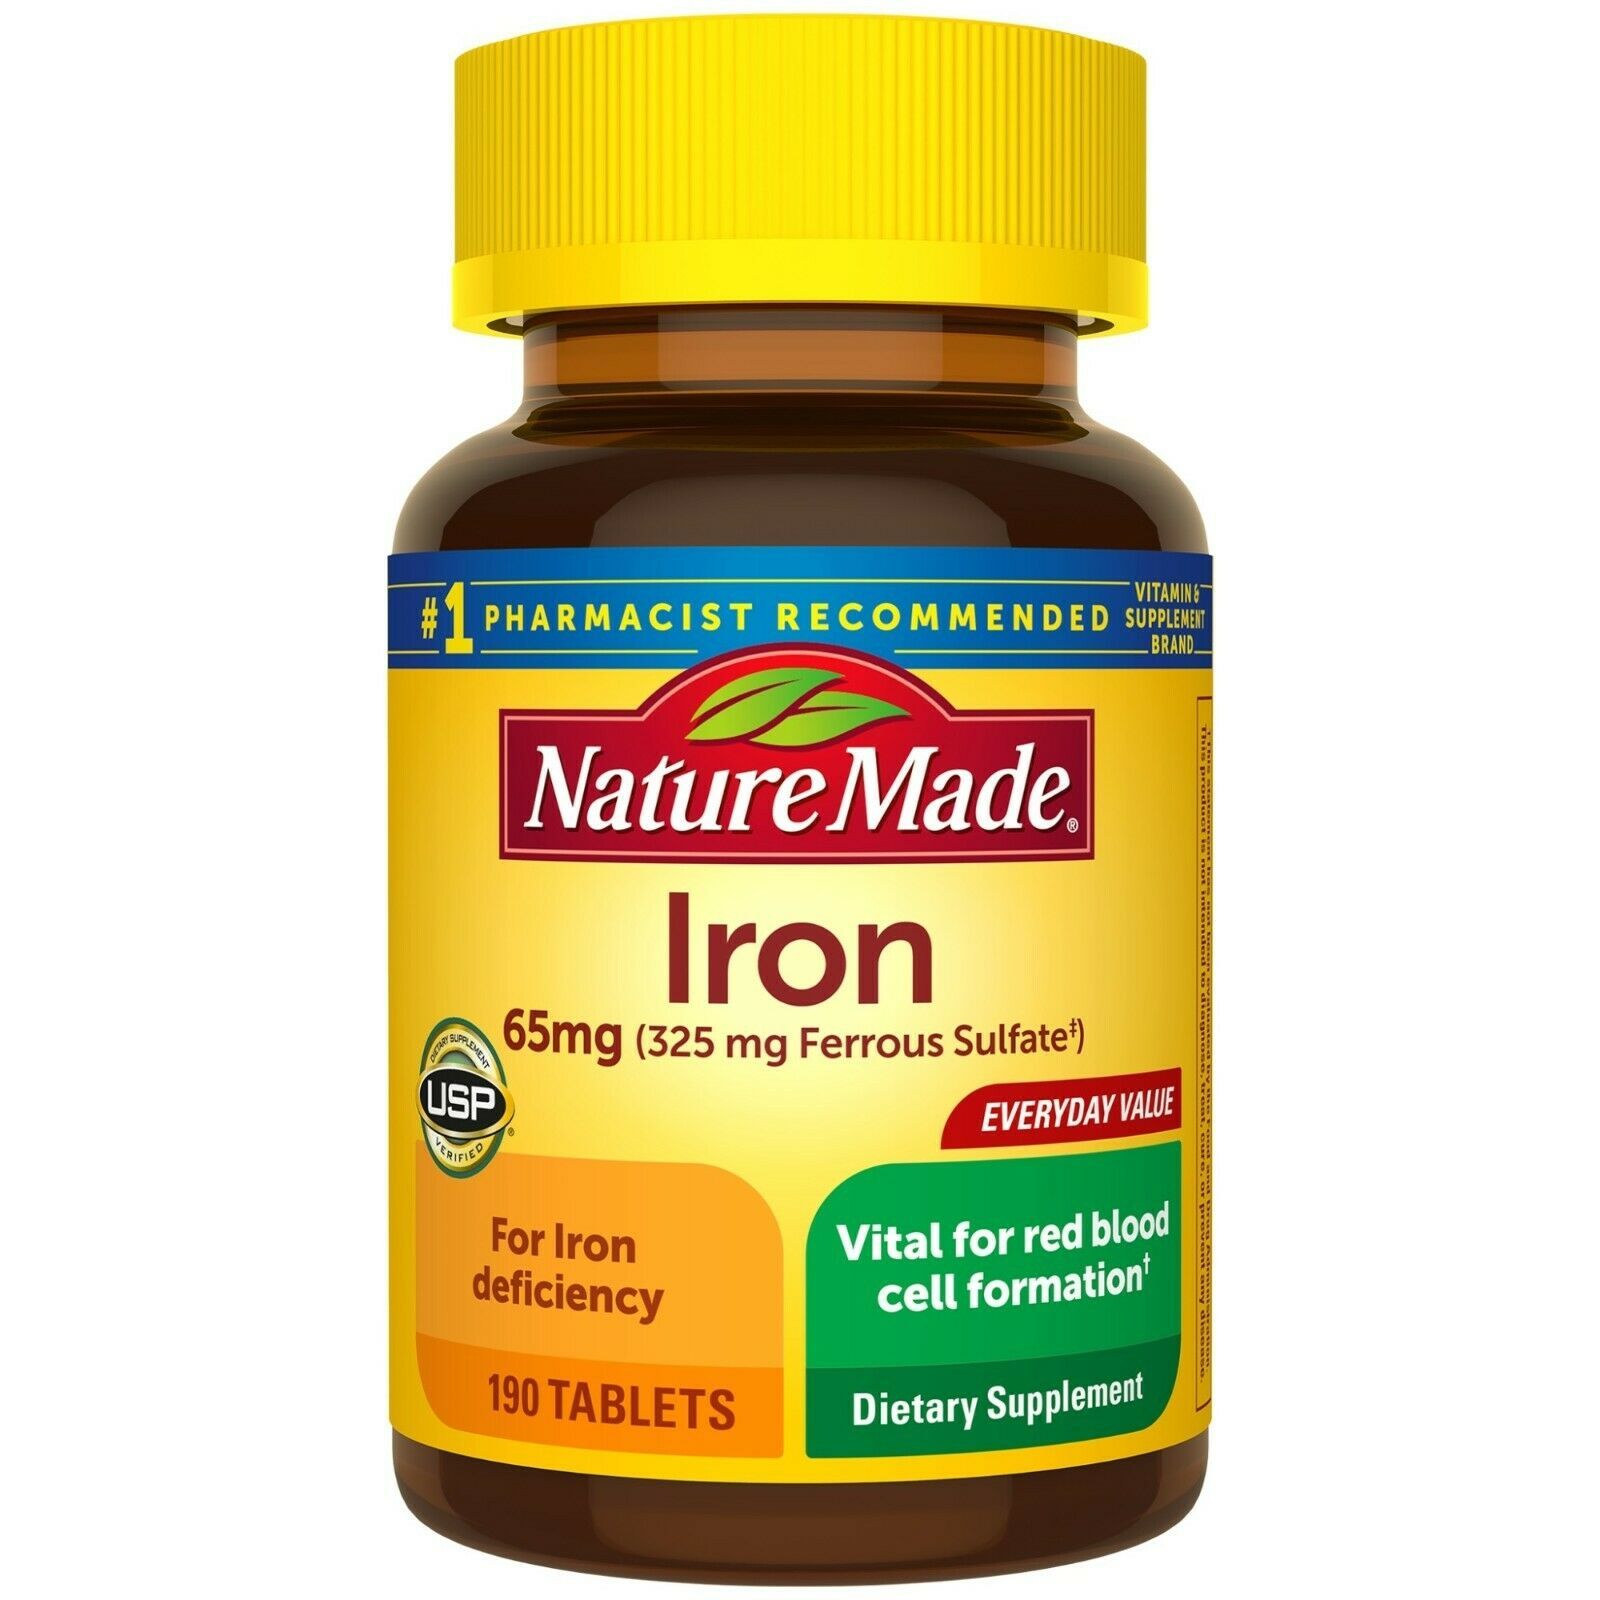 Primary image for Nature Made Iron 65 mg (from Ferrous Sulfate) Tablets, 190 Count  for Red Blood+